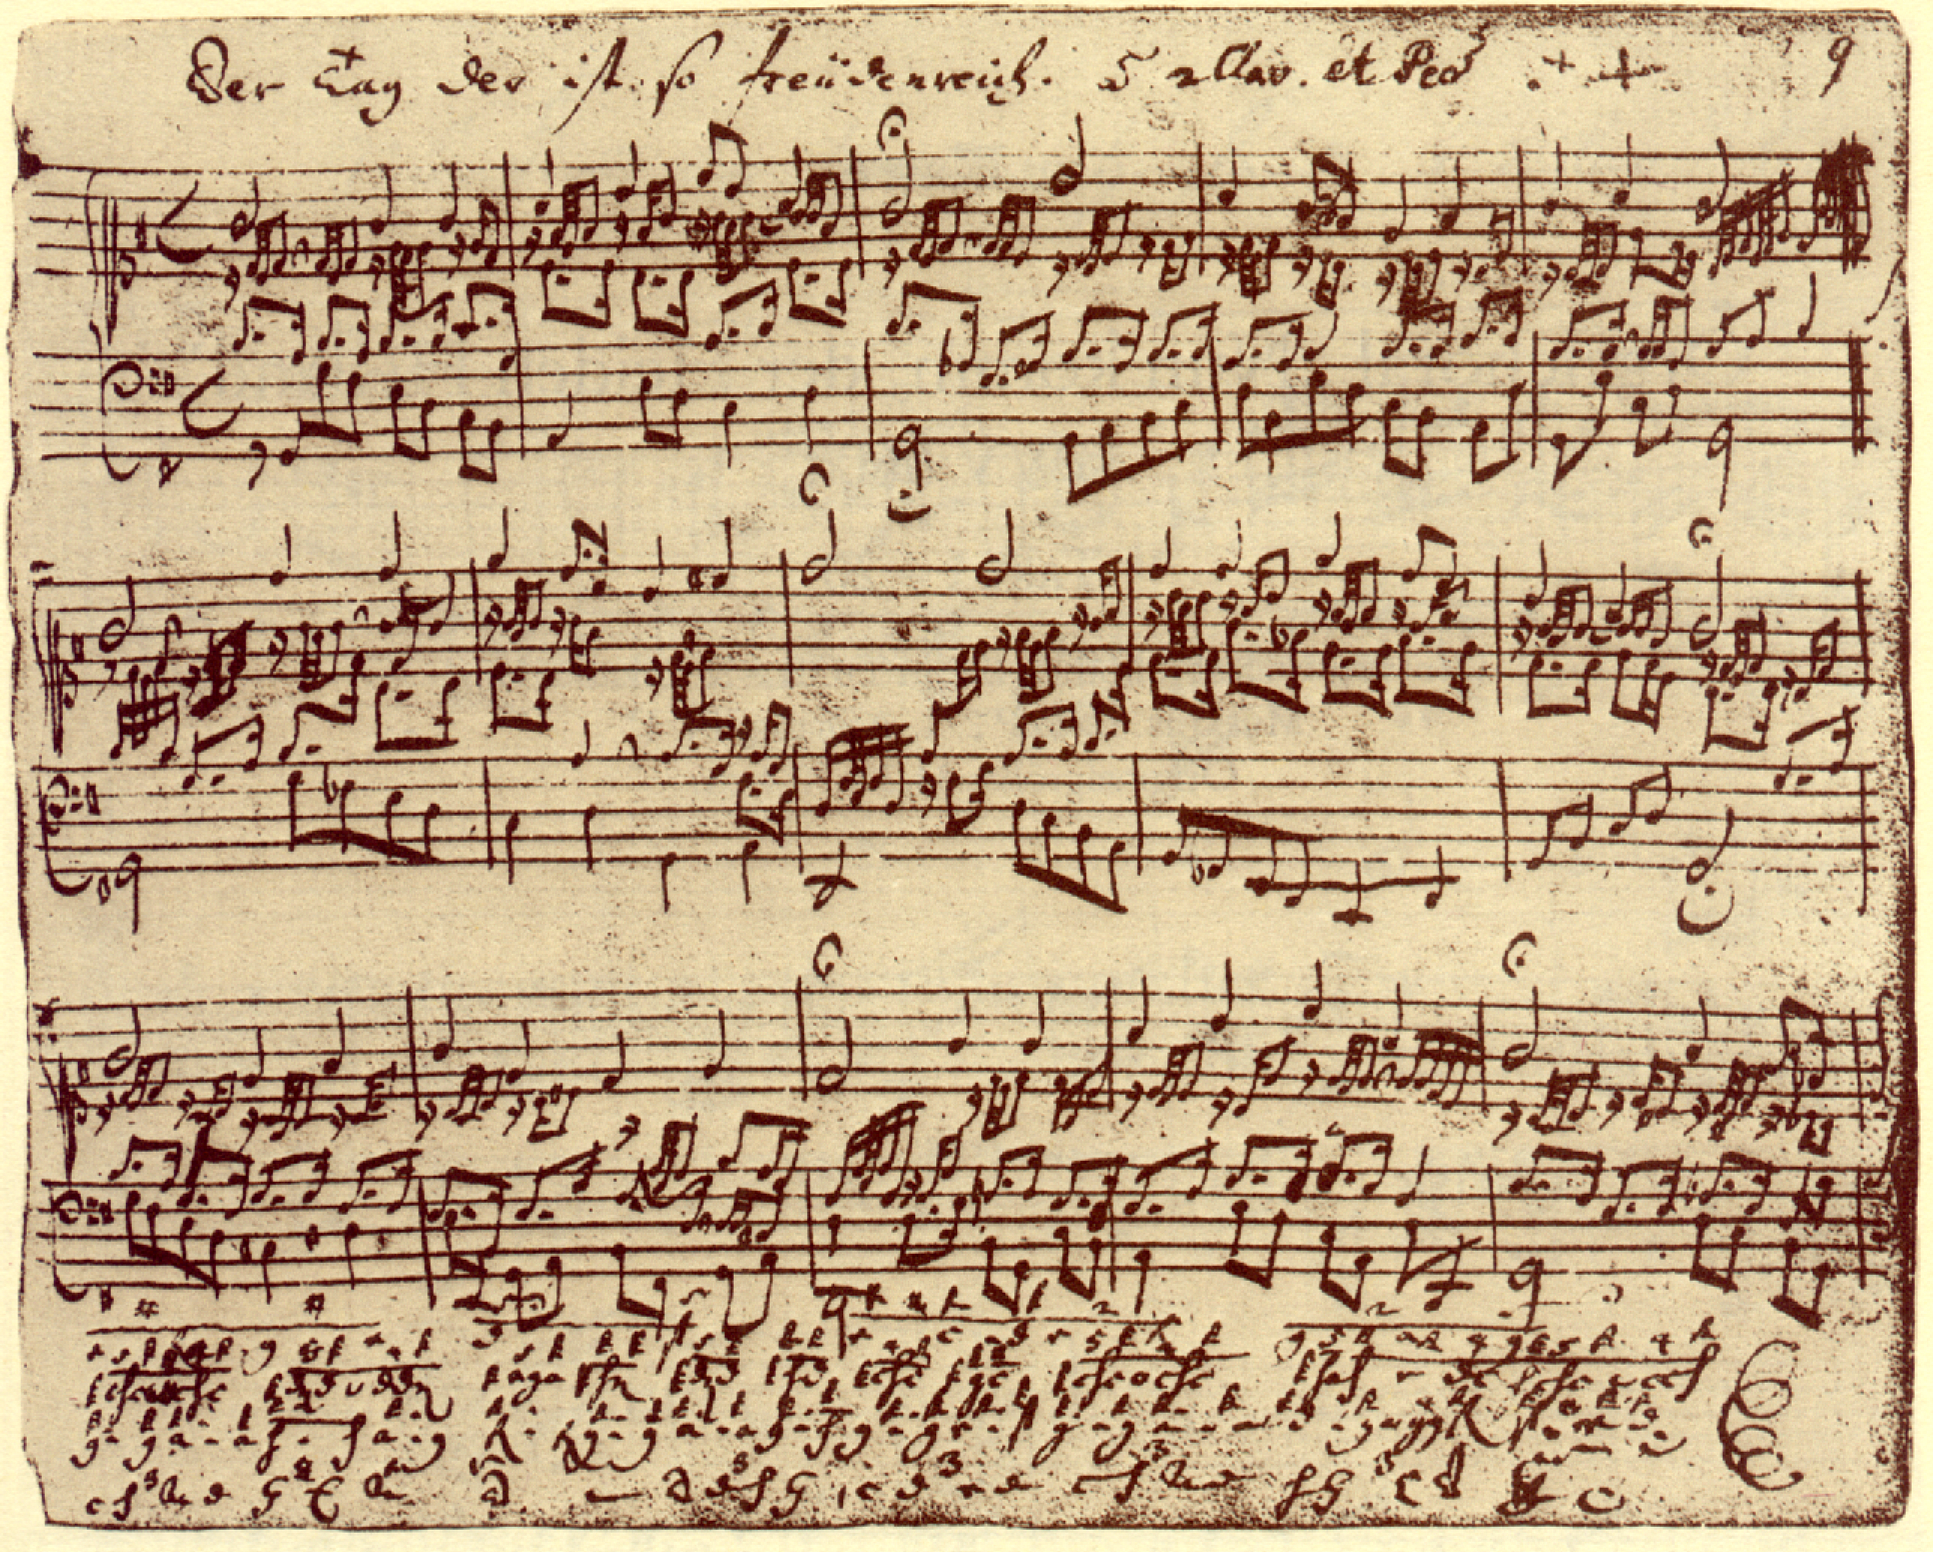 A scanned copy of the first page of Johann Sebastian Bach's manuscript of a choral prelude, 